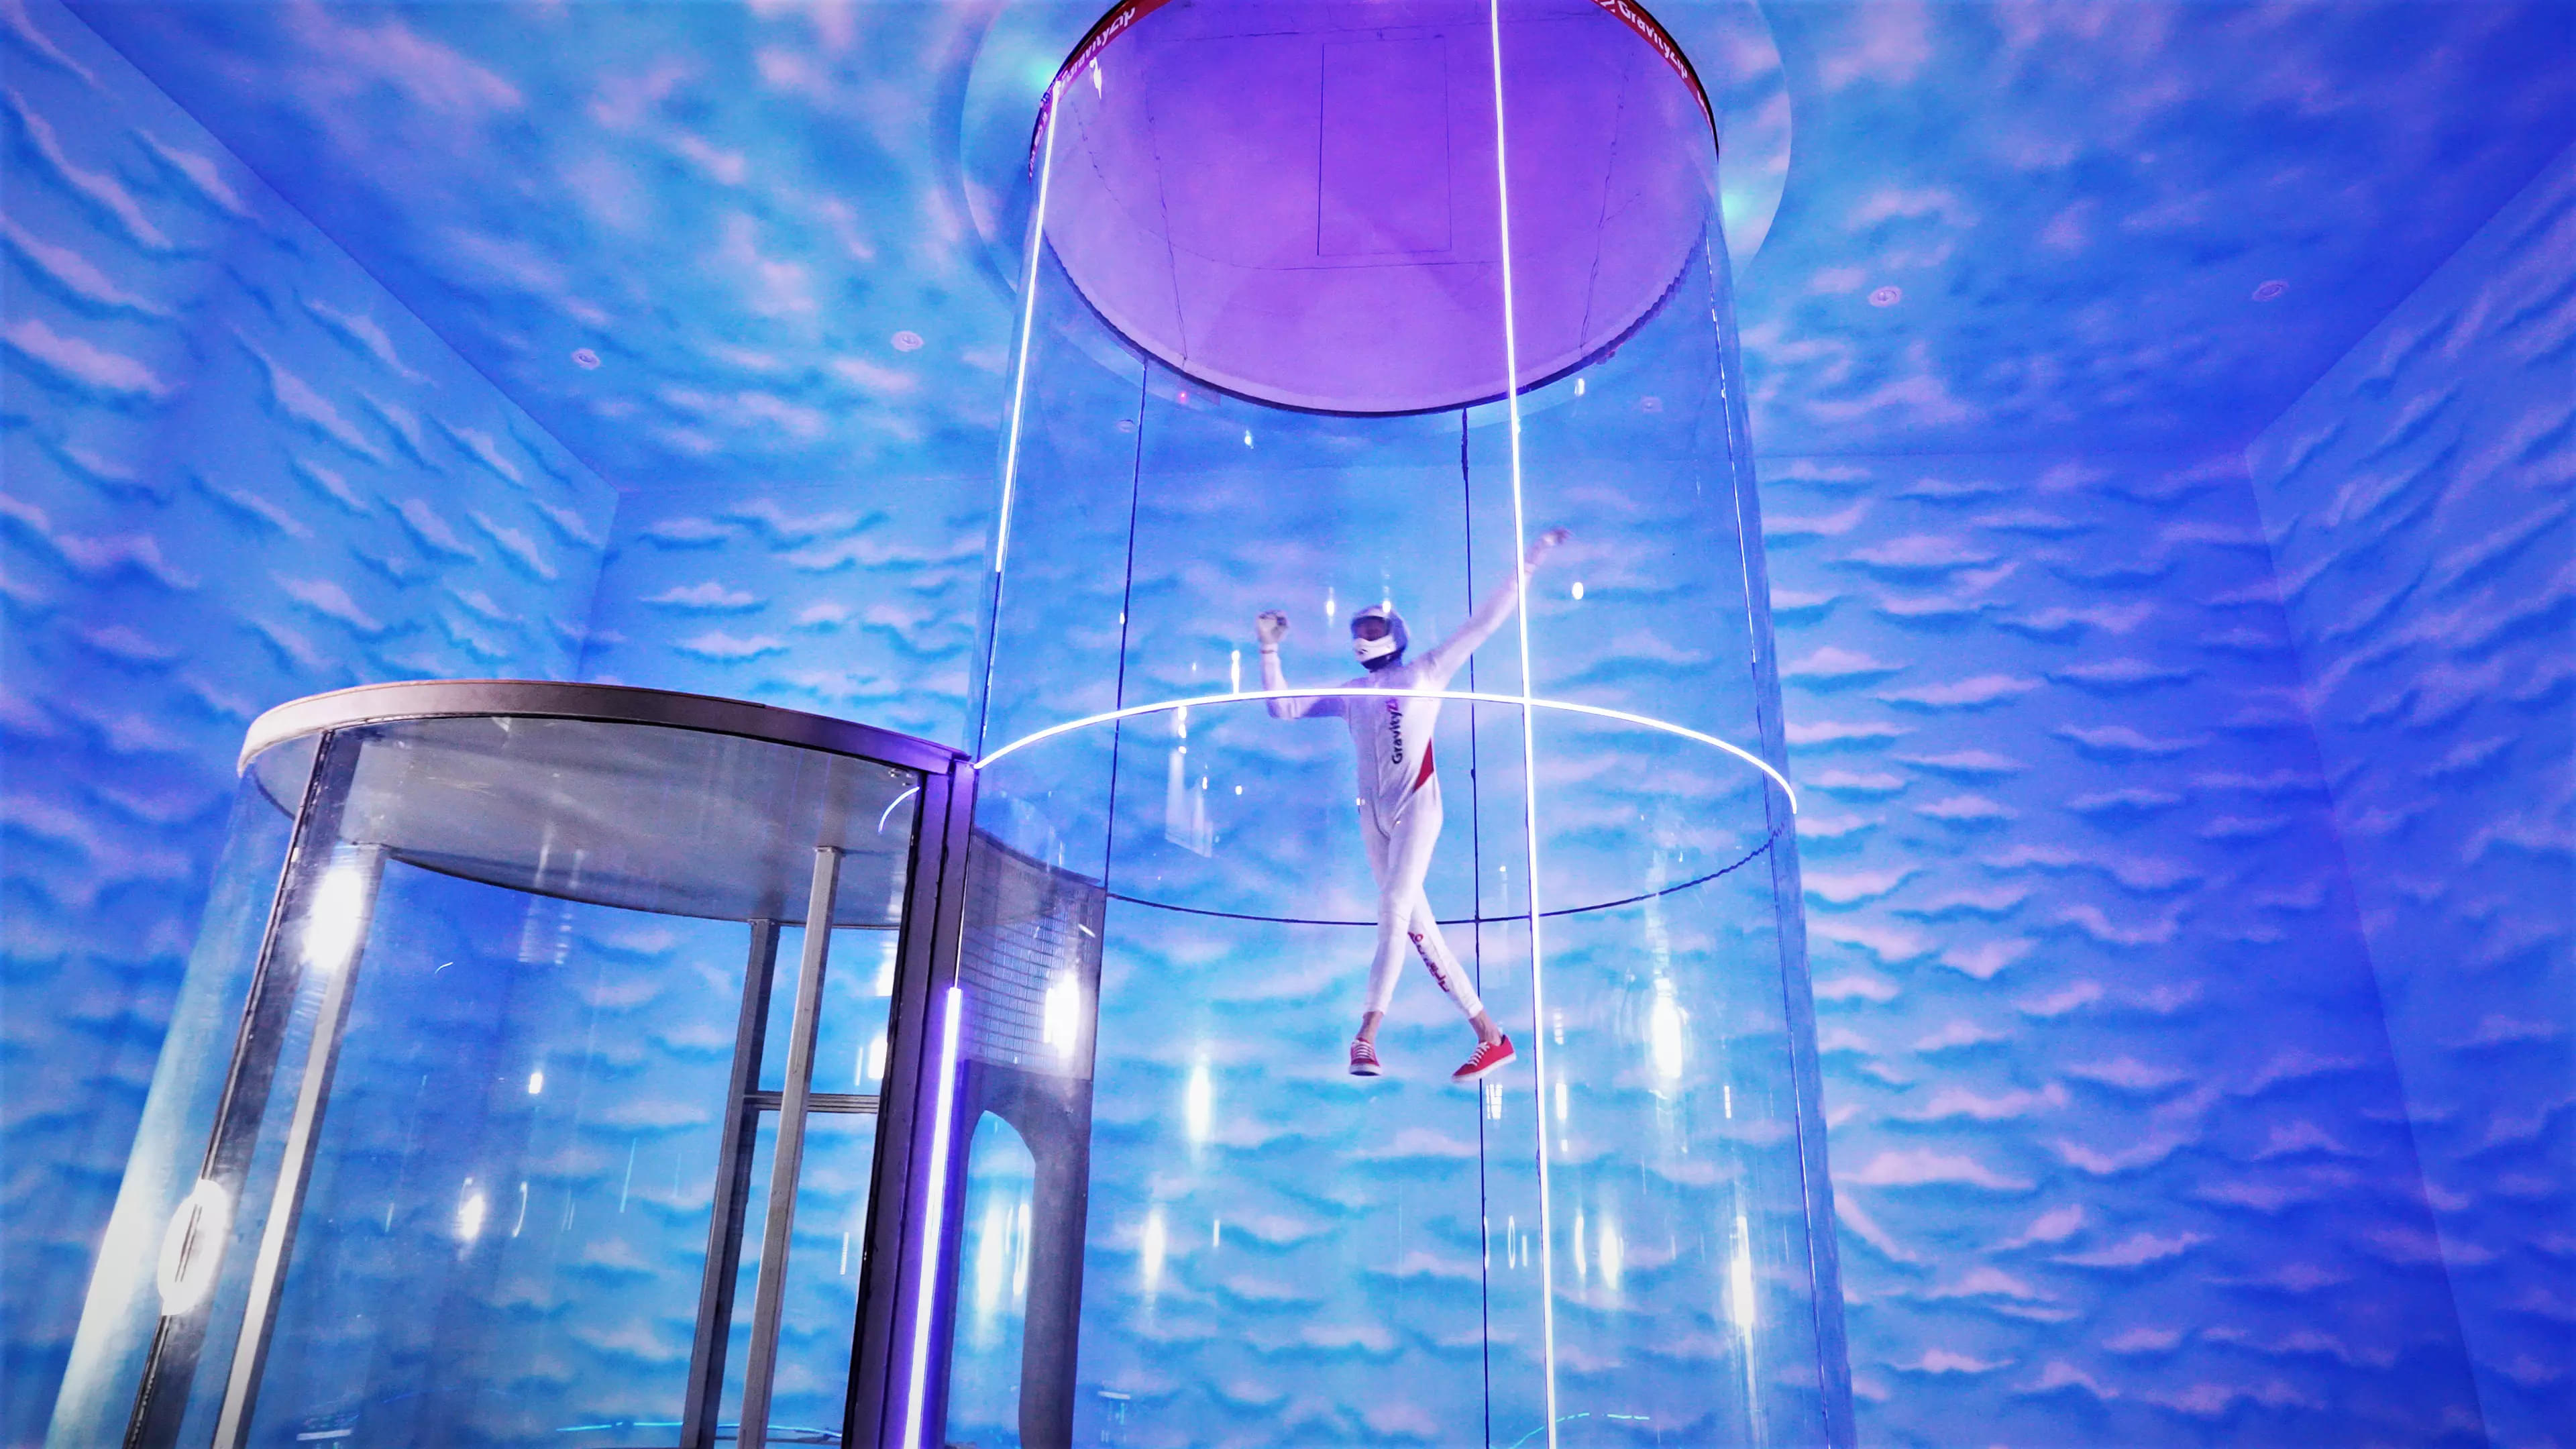 Visit the indoor skydiving centre in Hyderabad